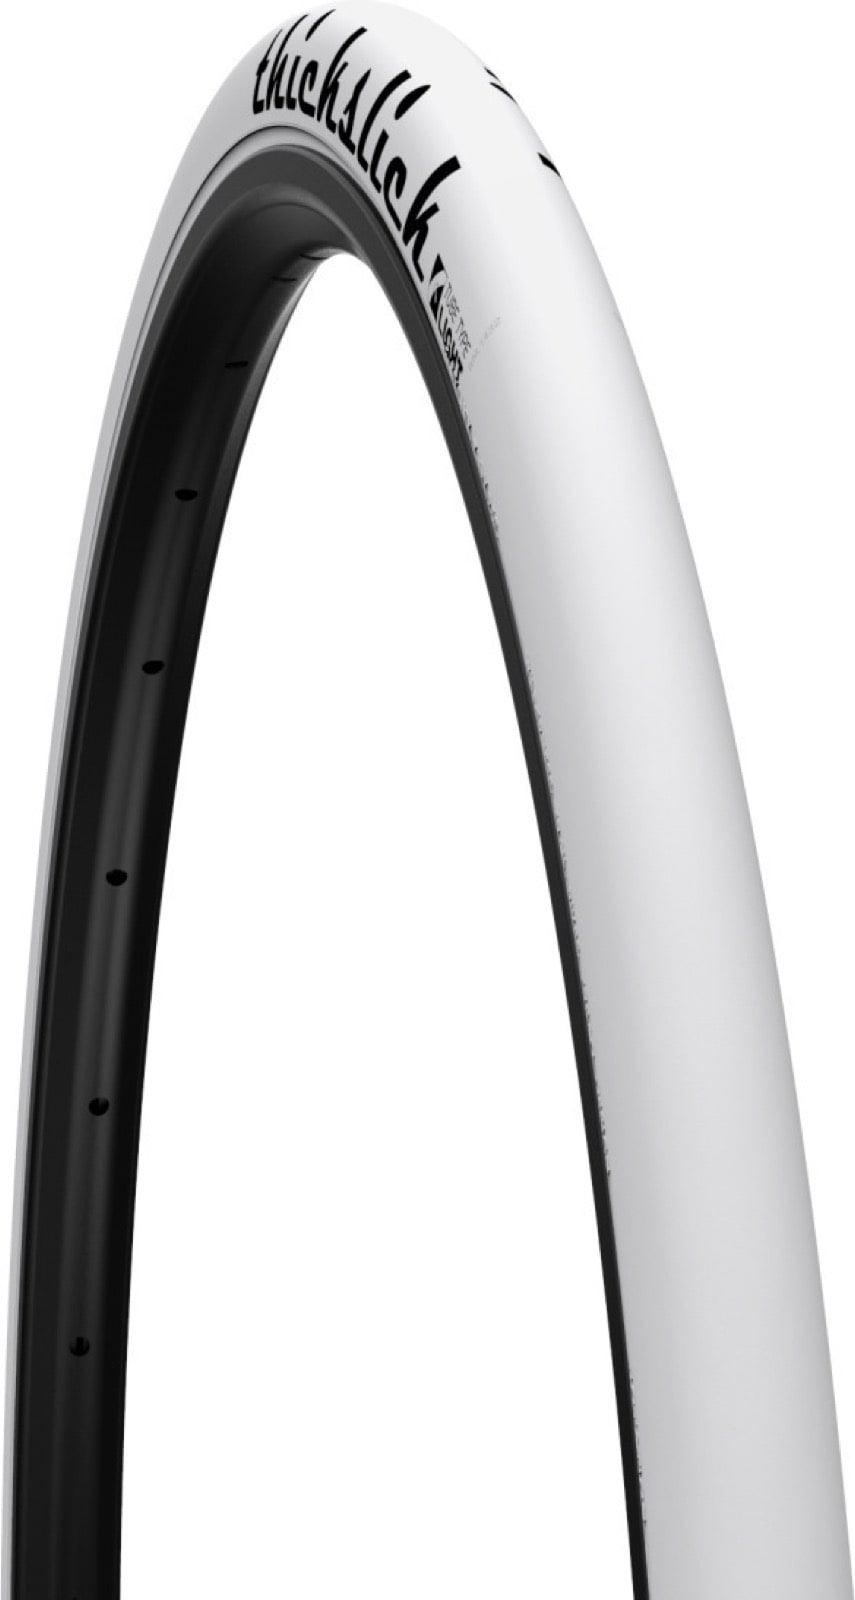 Thick Slick Ultimate Commuter Bicycle Tire